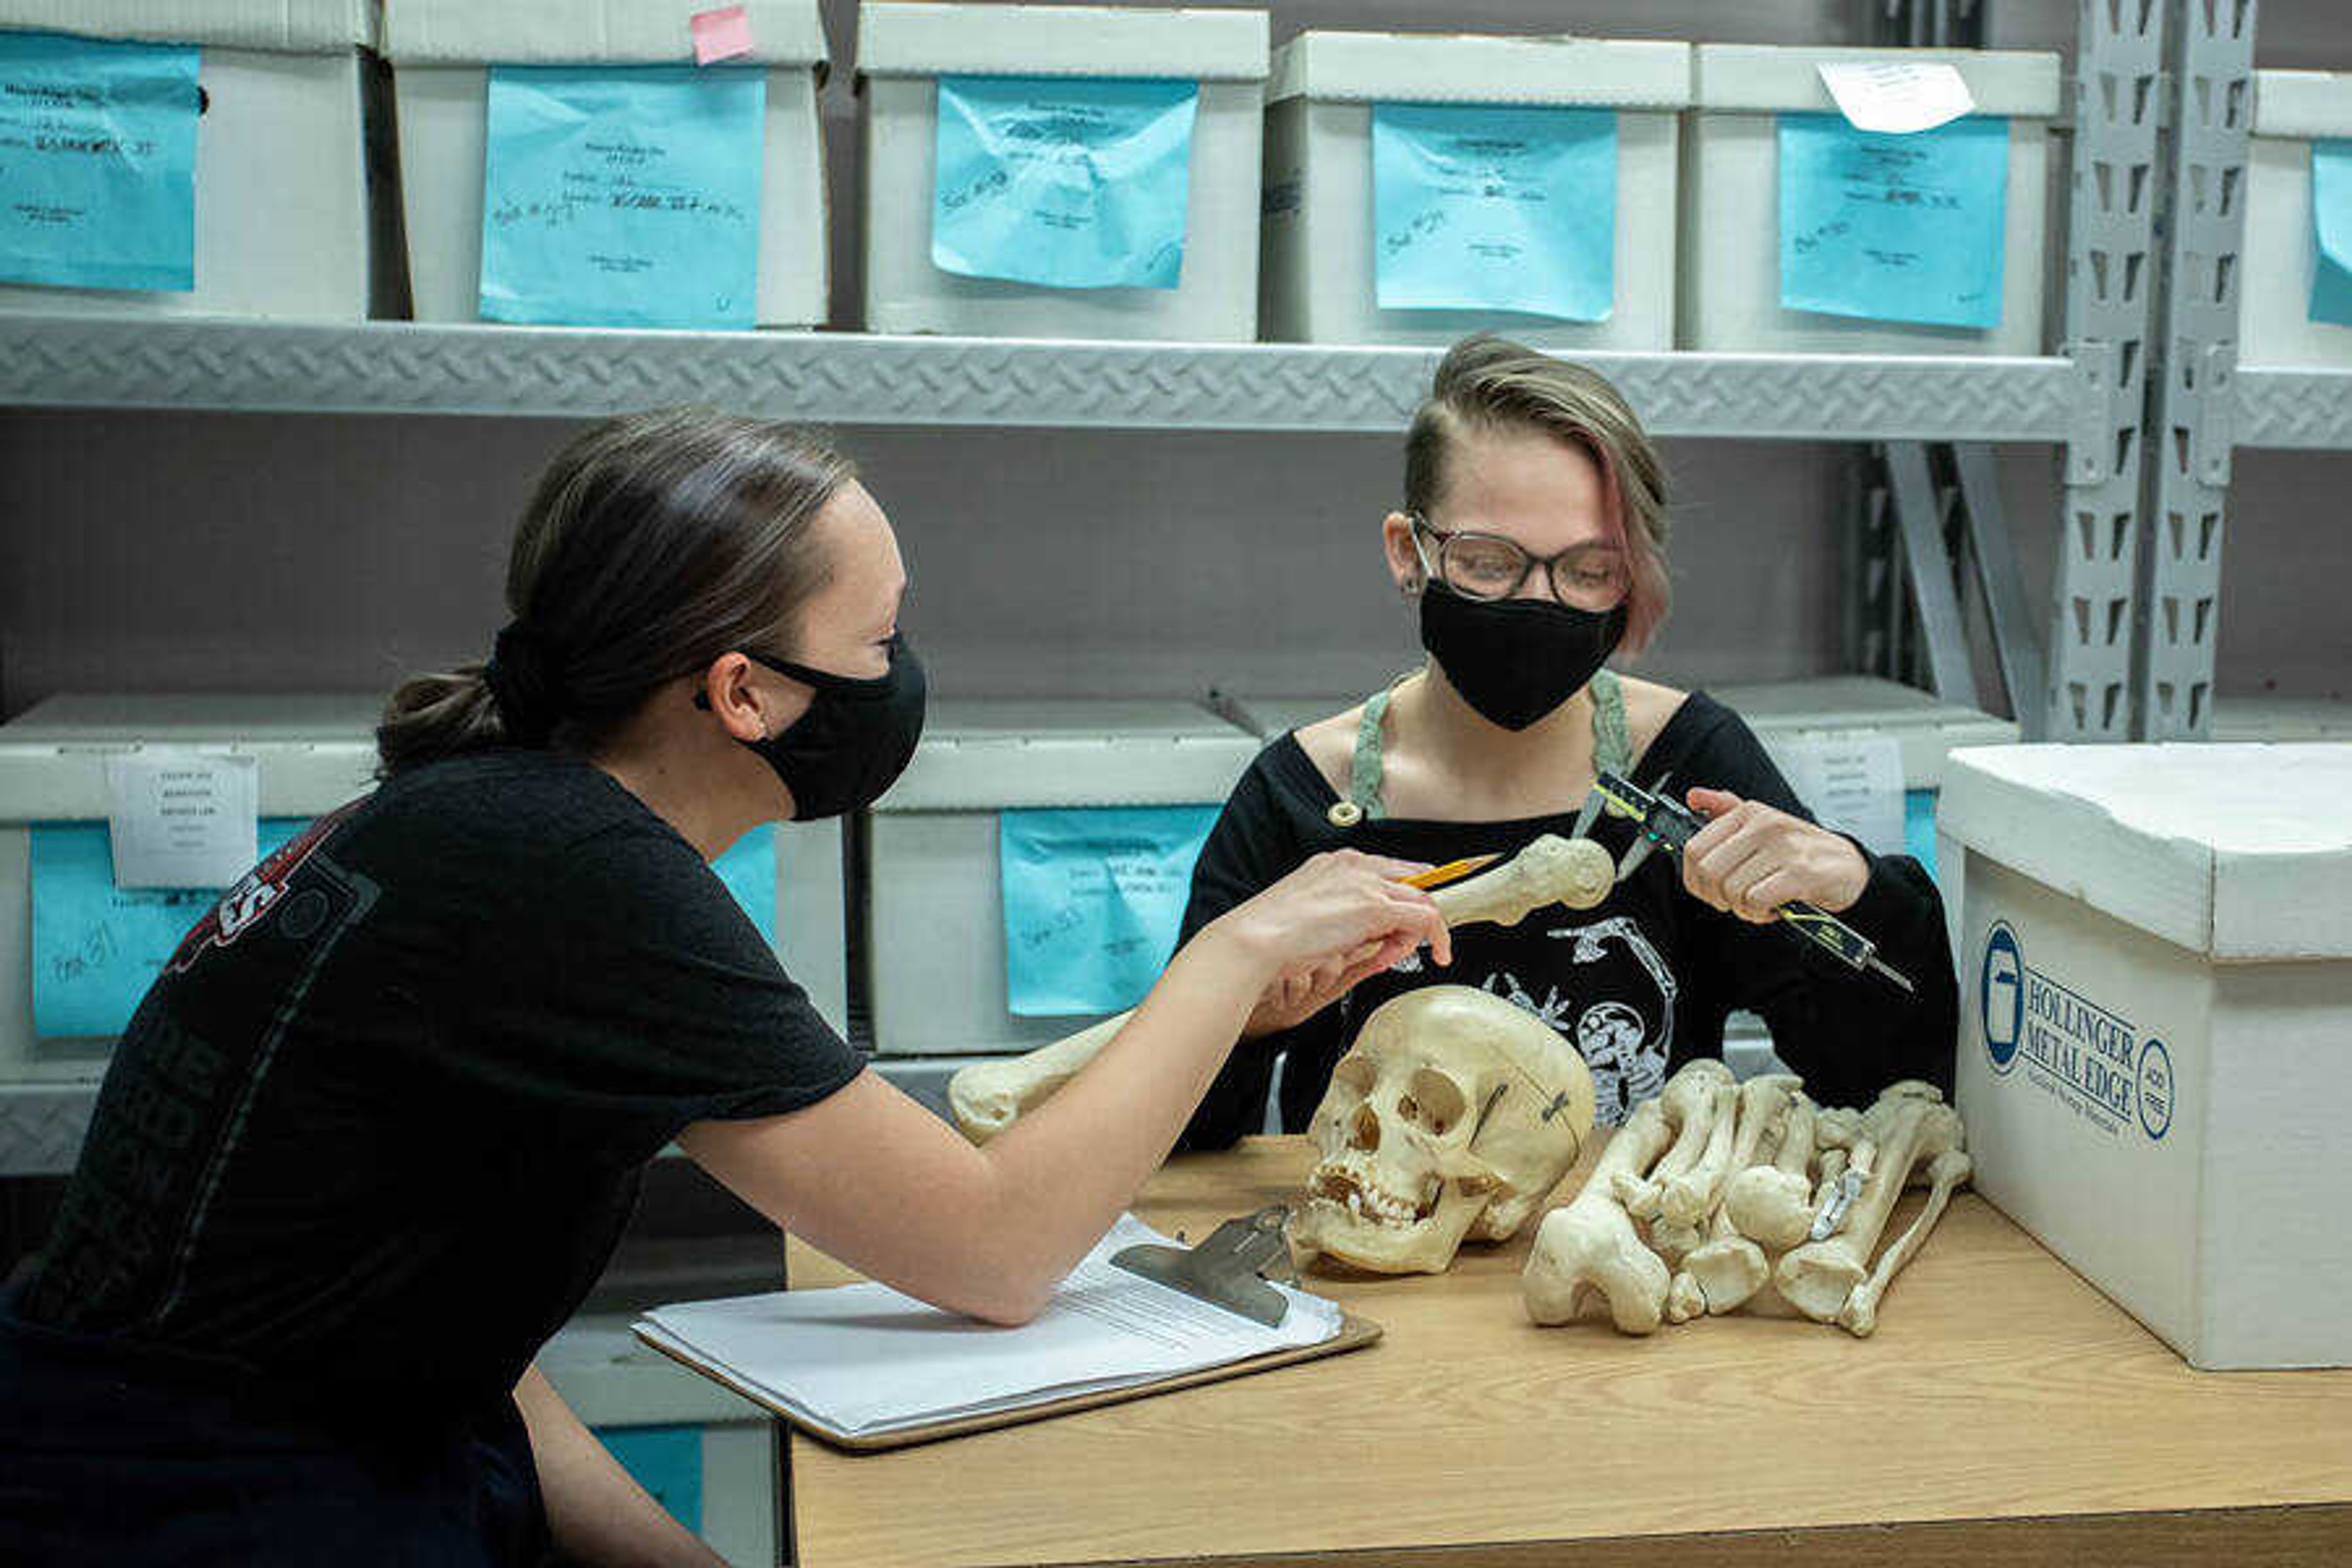 Southeast anthropology club members study a skeleton at Pacific Hall on Sept. 17.